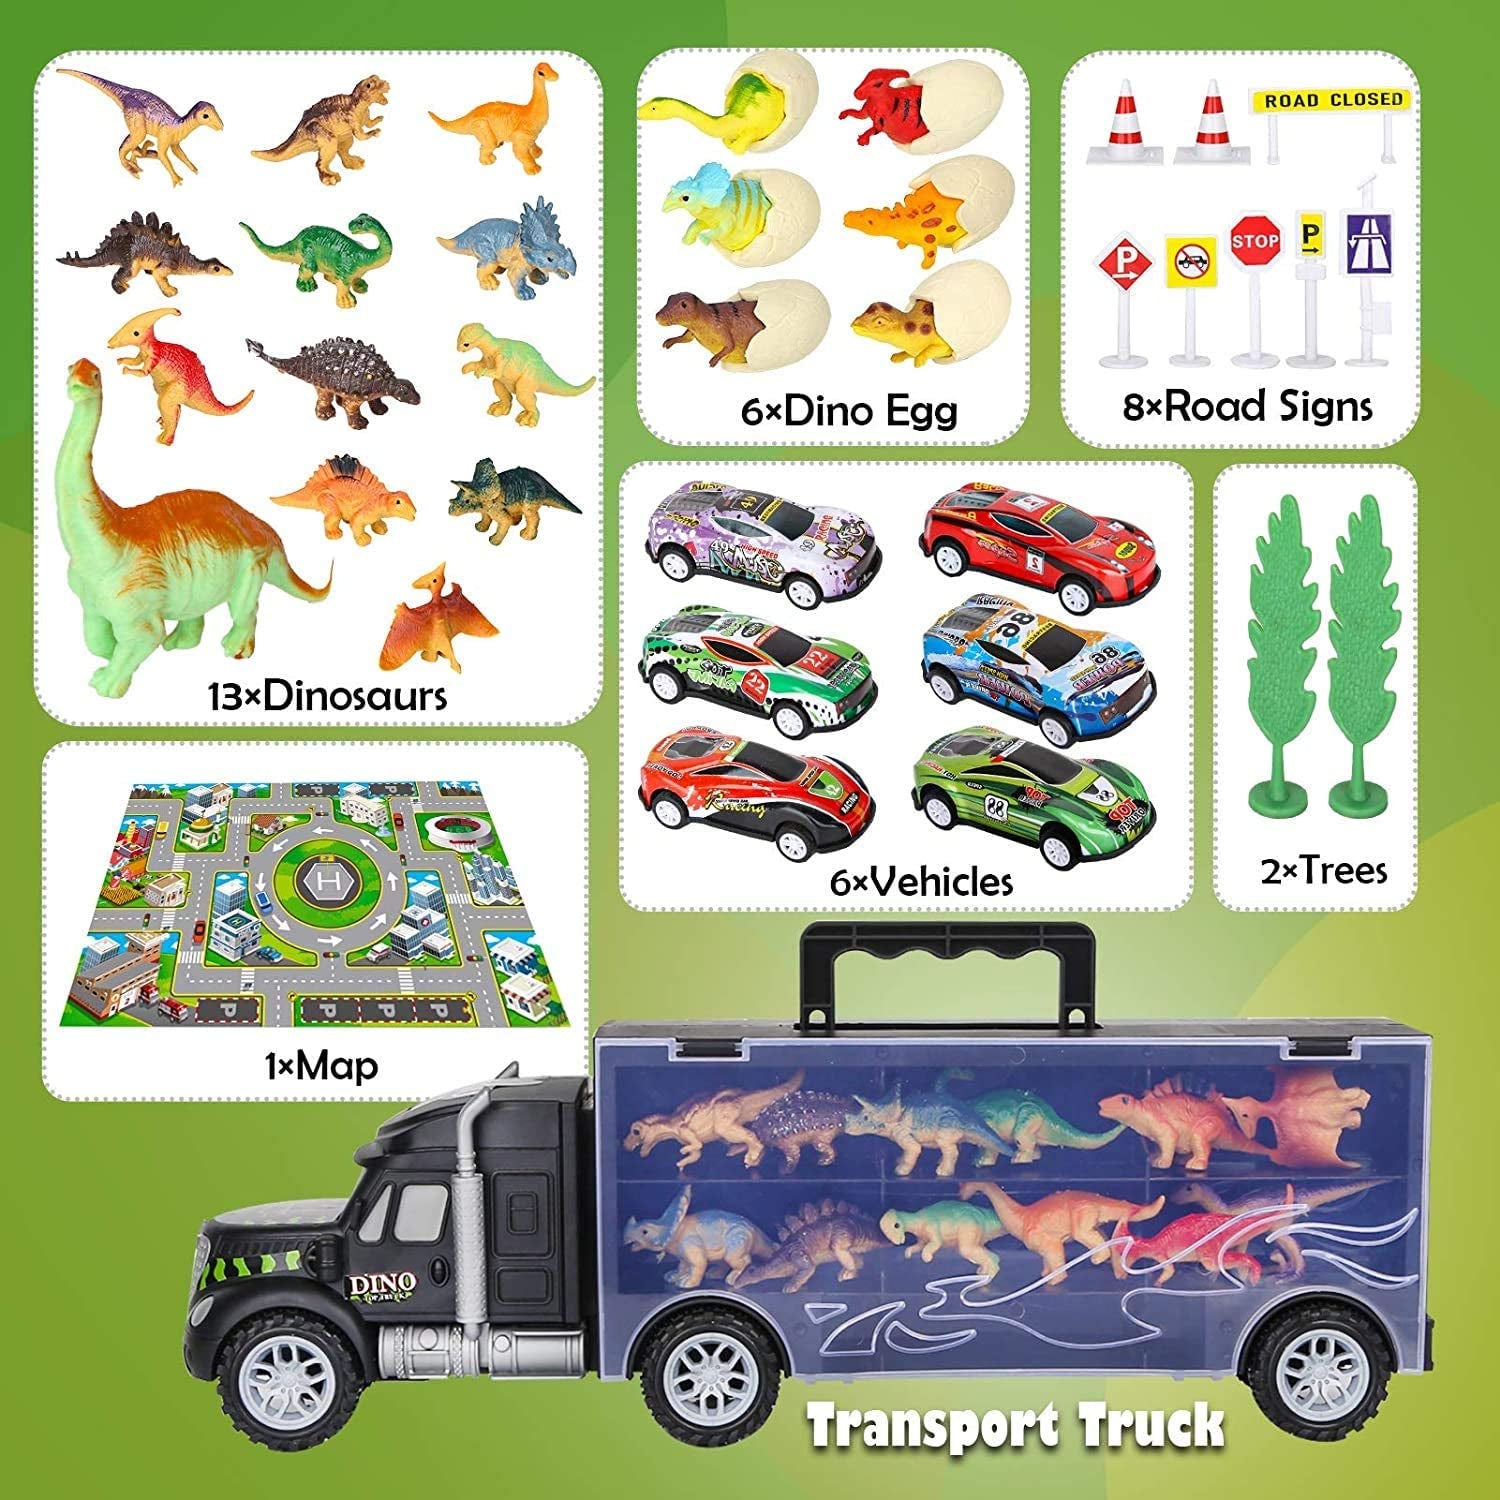 Dinosaur Truck Toy Car Transporter Carrier Set Include Dinosaur Figures & Egg Mini Racing Car with Play Mat, Road Signs for Children 37PCS